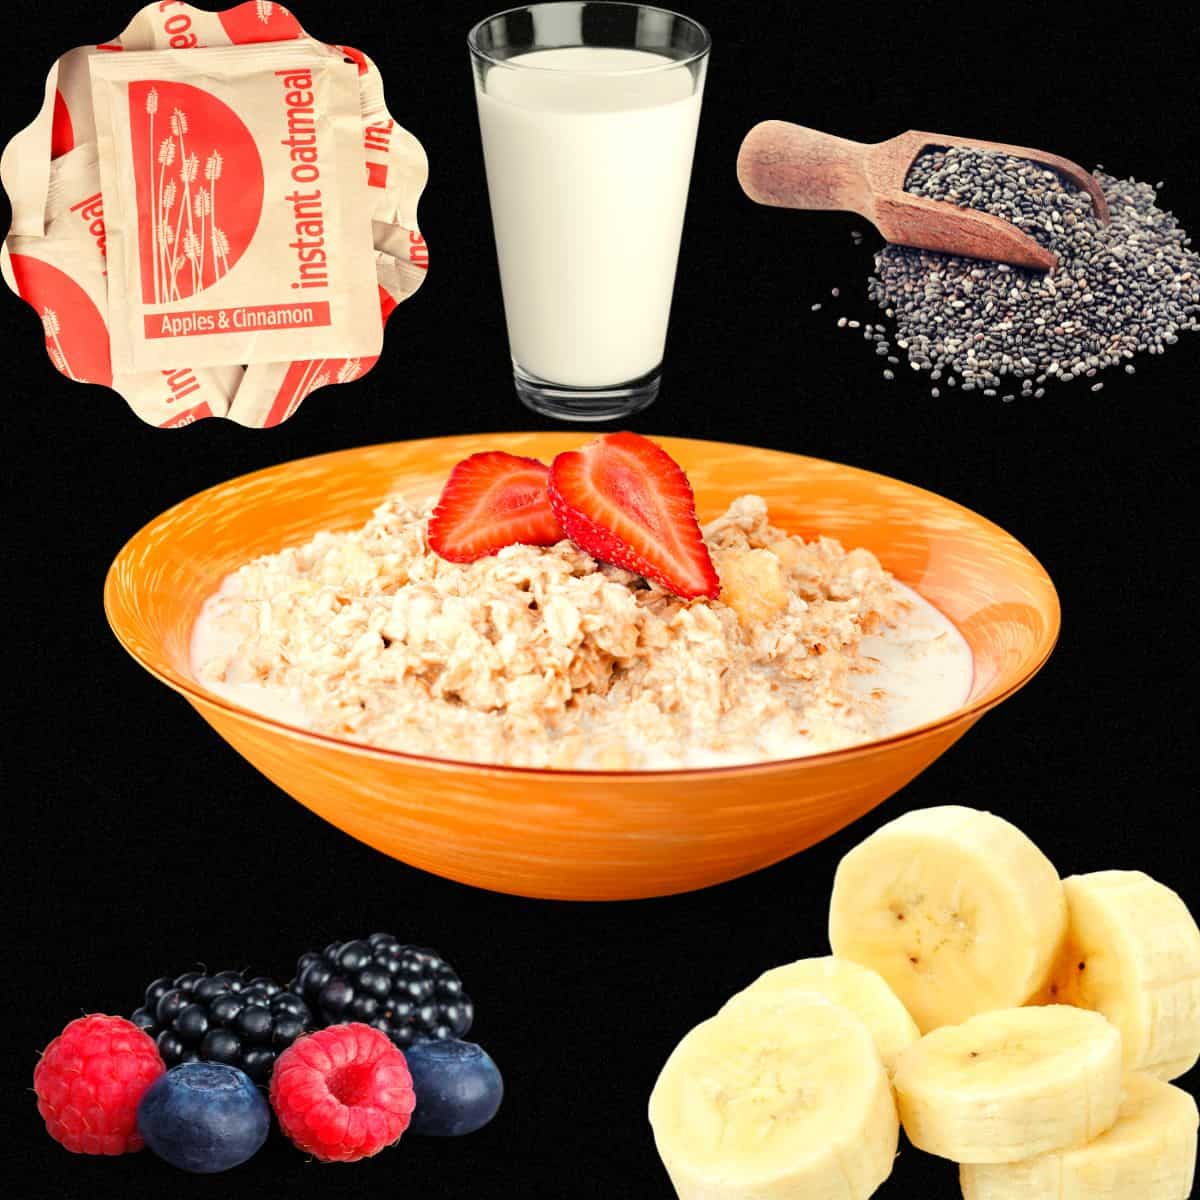 ingredients shown in the image to make overnight oats with instant oats packets